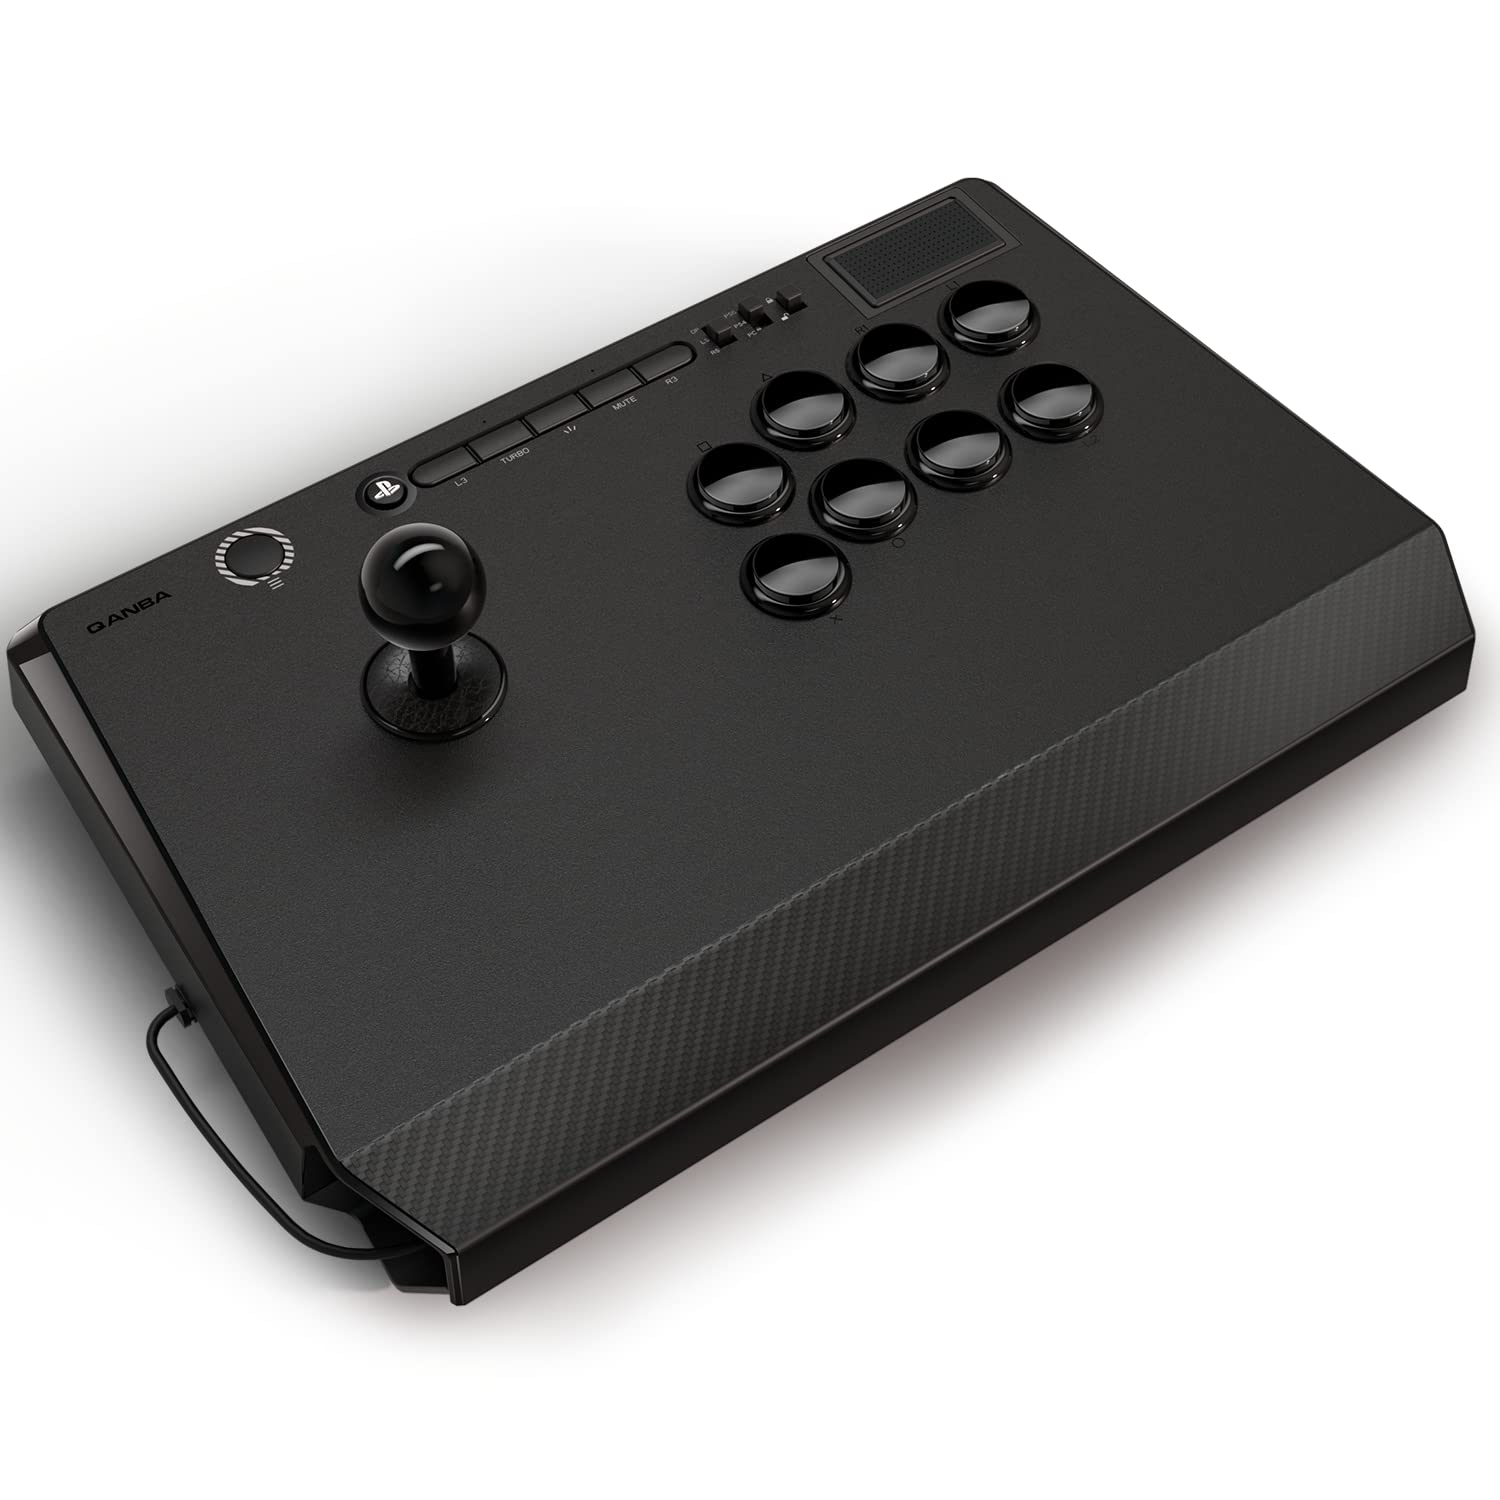 Qanba B1 Titan Wired Joystick for PlayStation 5/4 and PC